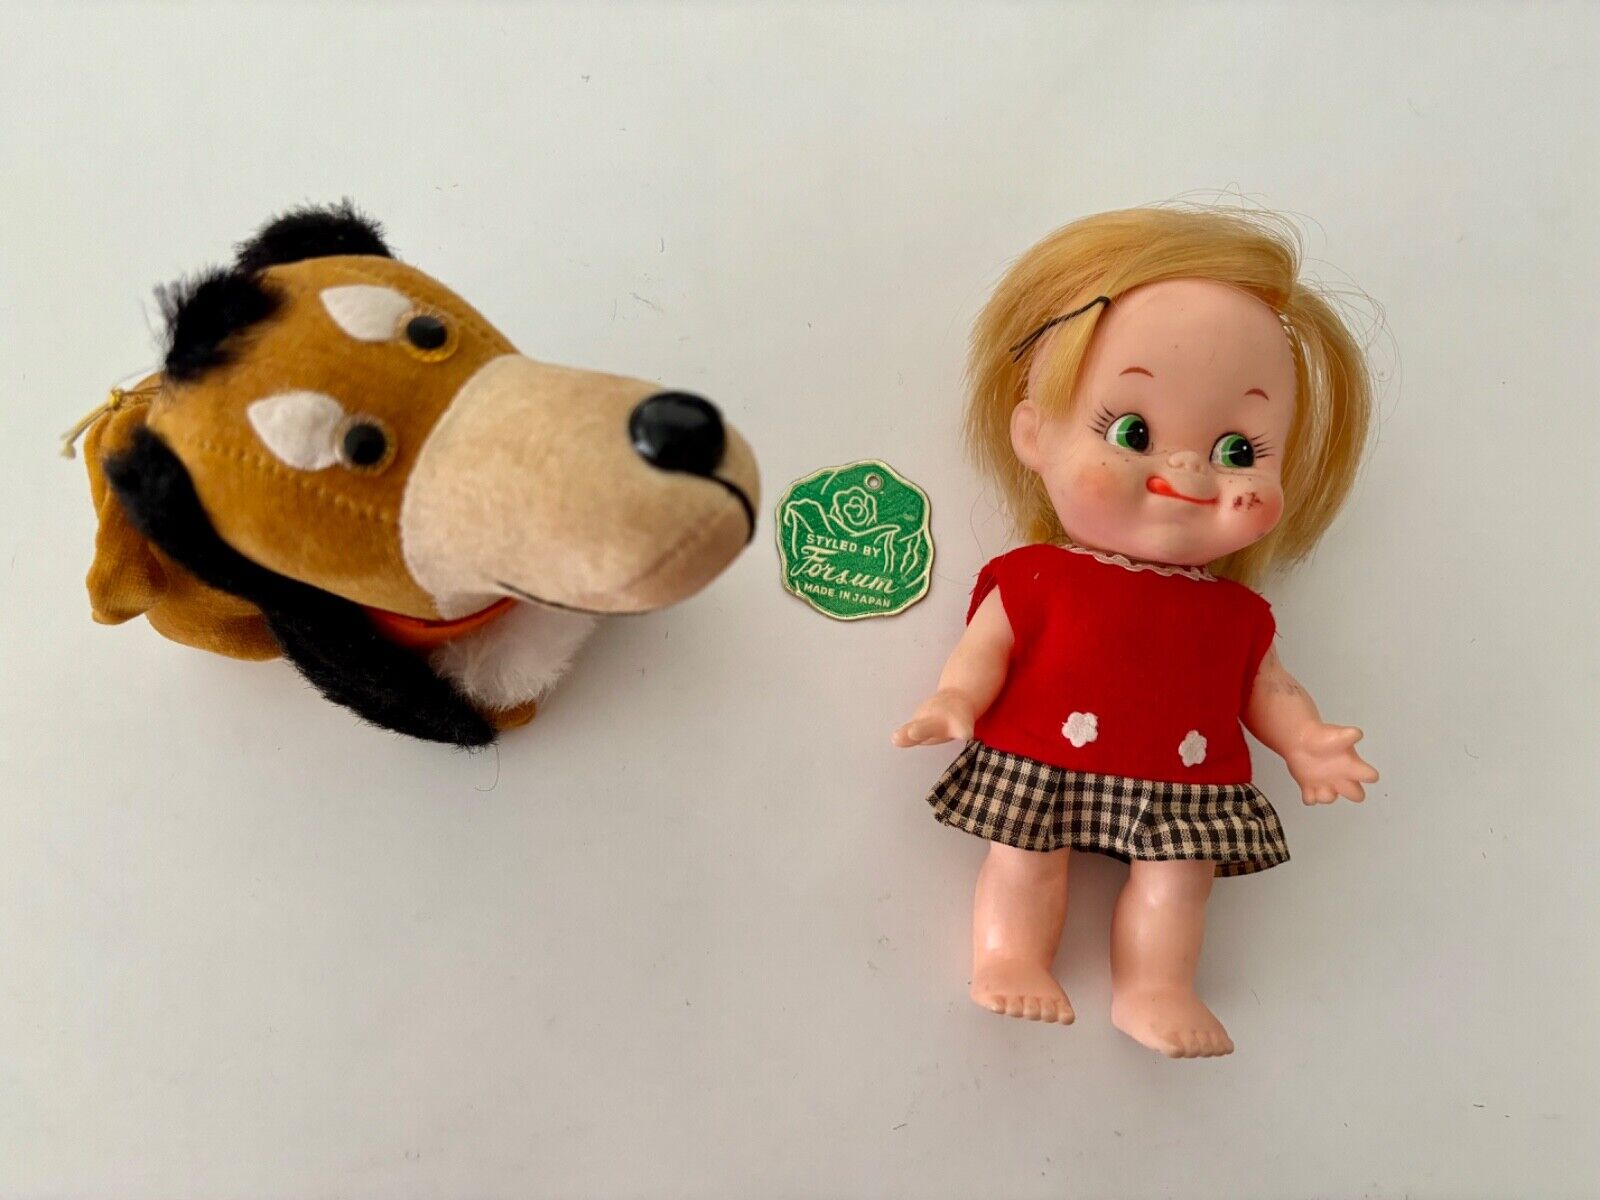 Forsum Vintage Doll and Pup-In Very Good Vintage Condition with No Rips or Tears